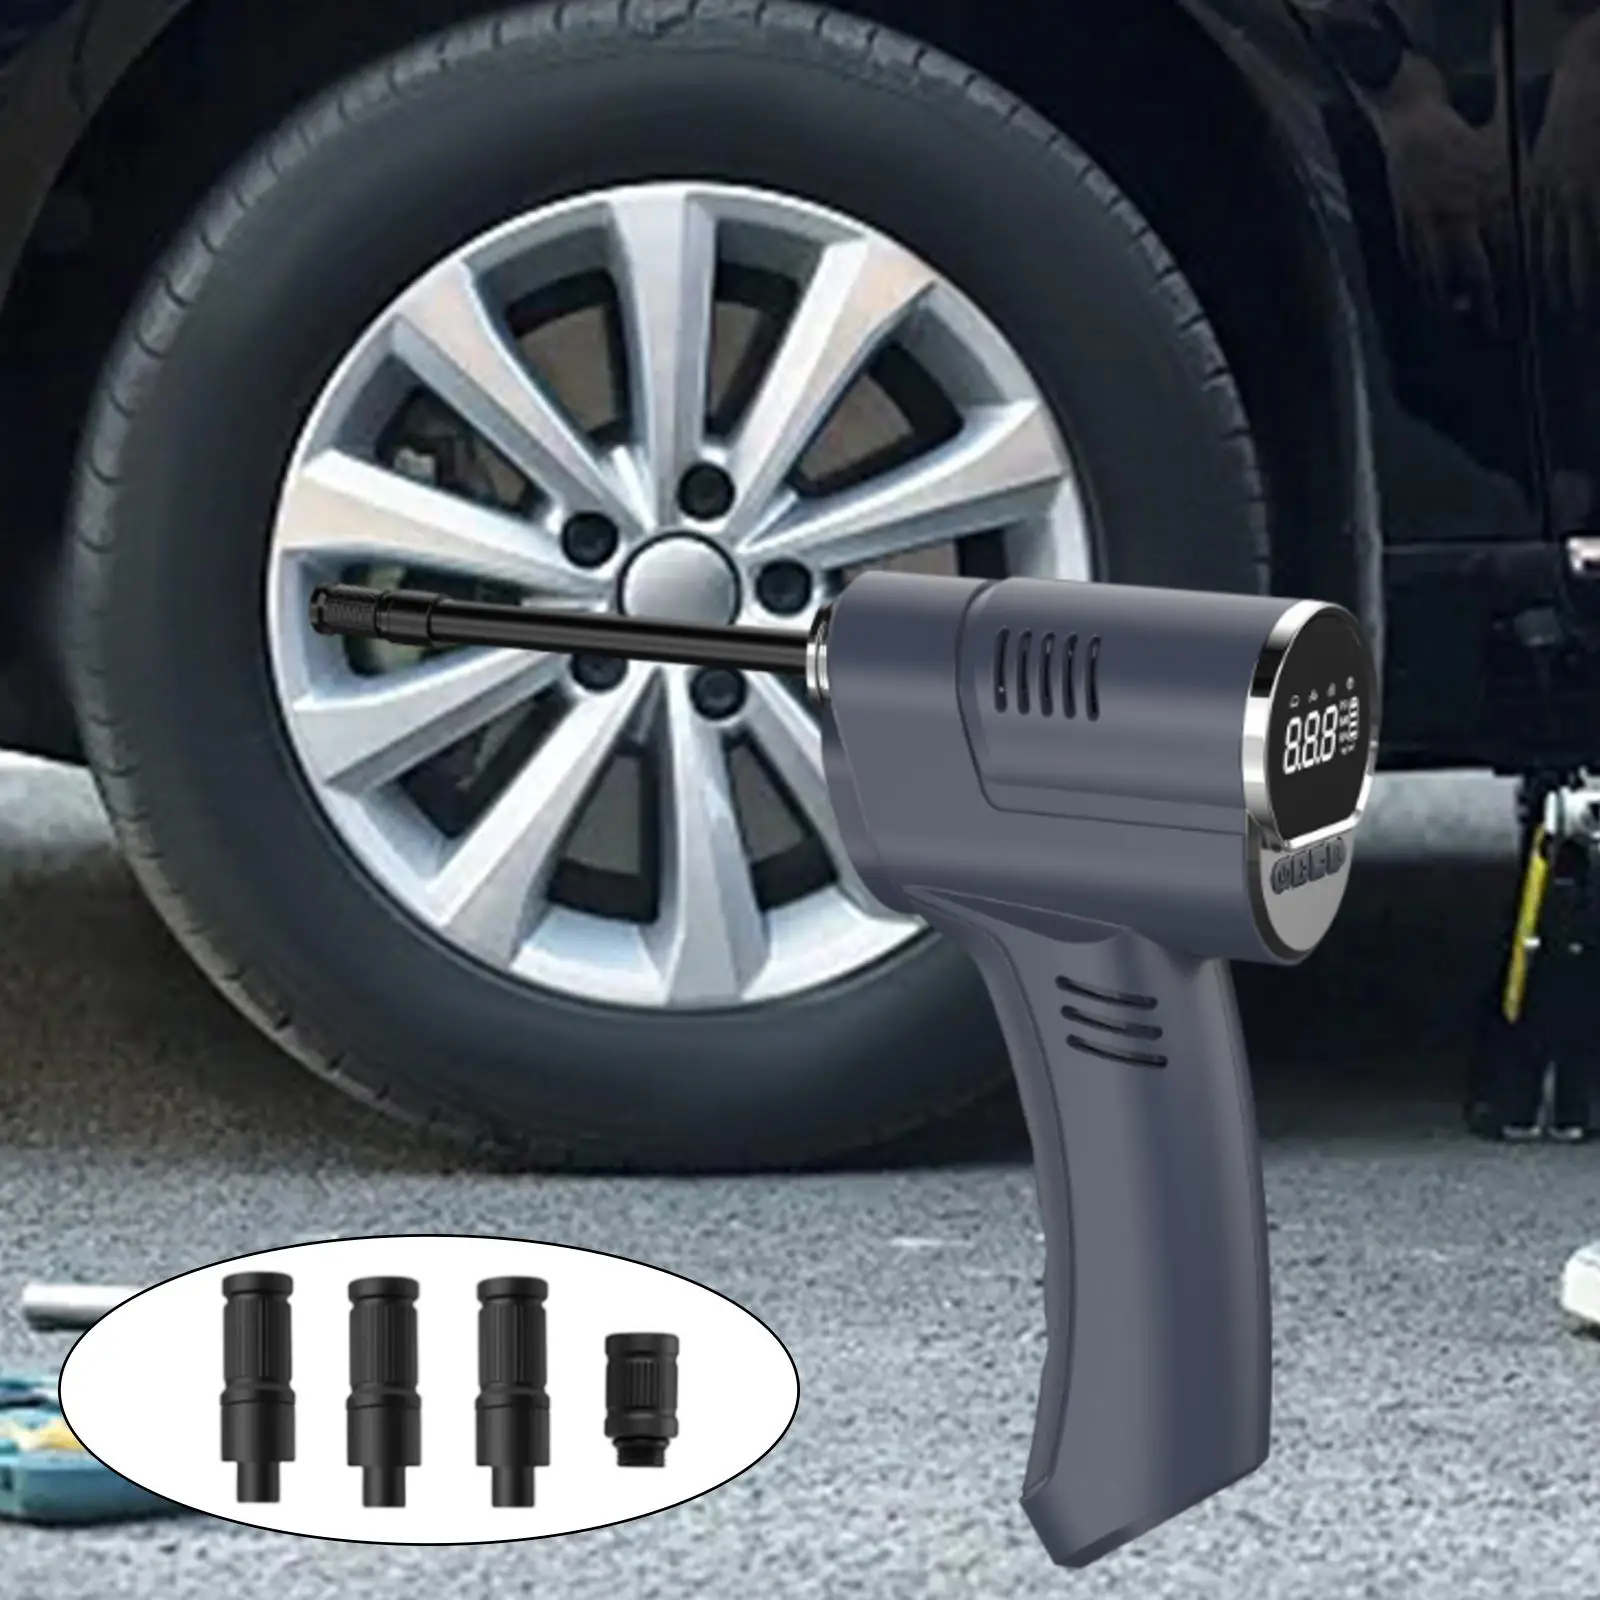 Cordless Electric Digital Tire Pump Car Tire Inflator Handheld Car Tyre Pump for Car Bike Lightweight with Lighting 5.2x2x8inch